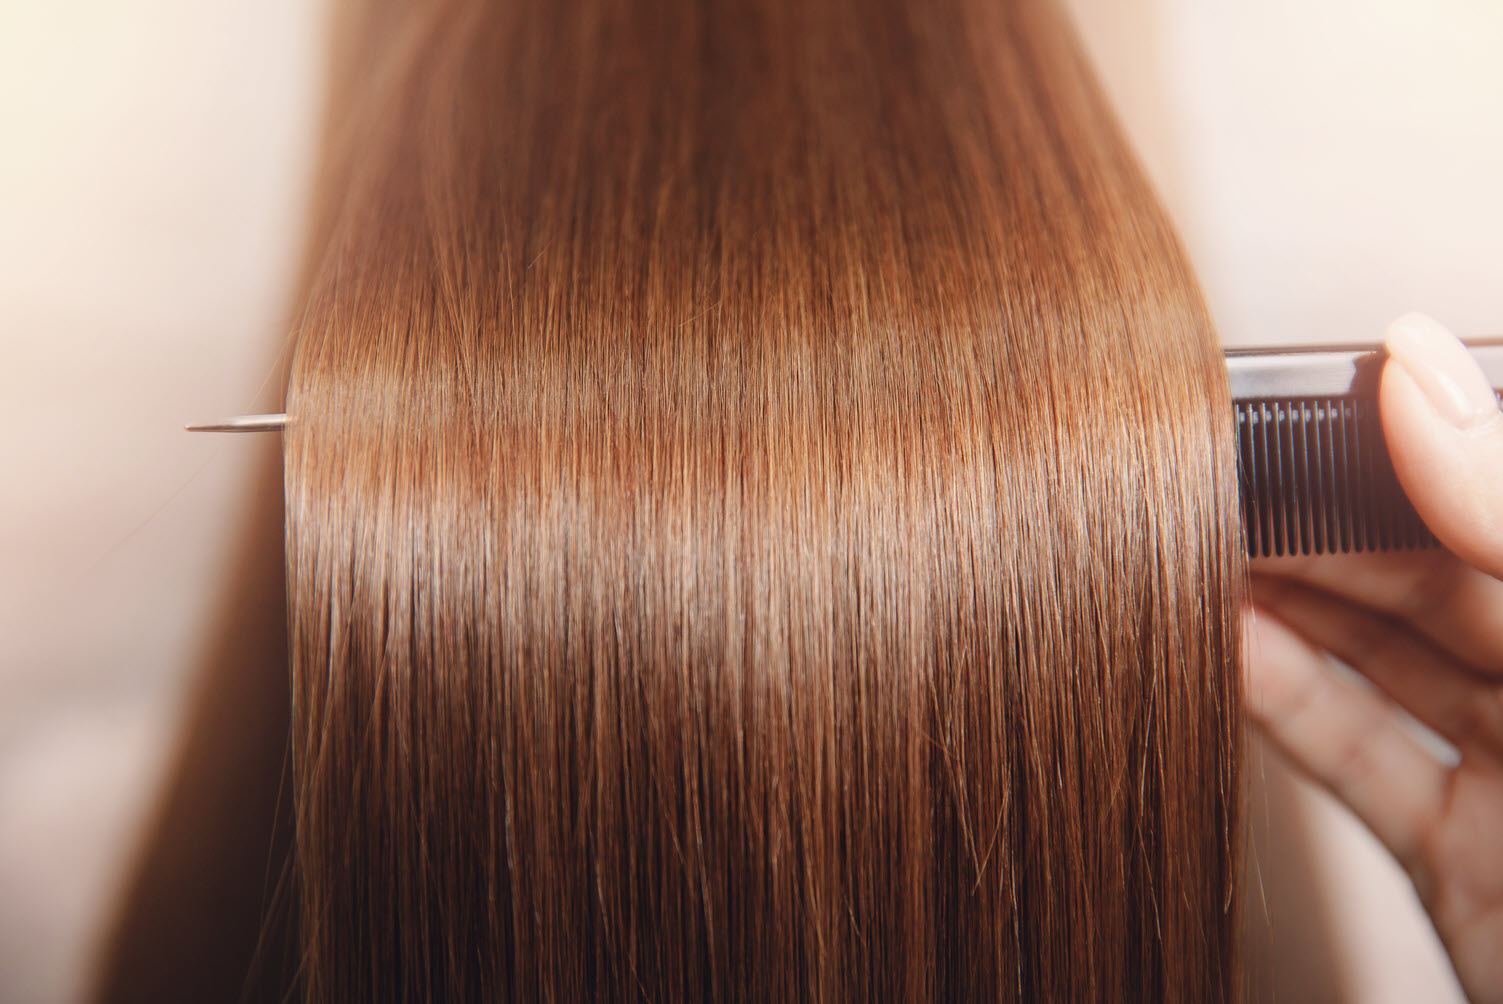 Hair Health Trends to Follow in 2022 - Avalanche Salon & Spa